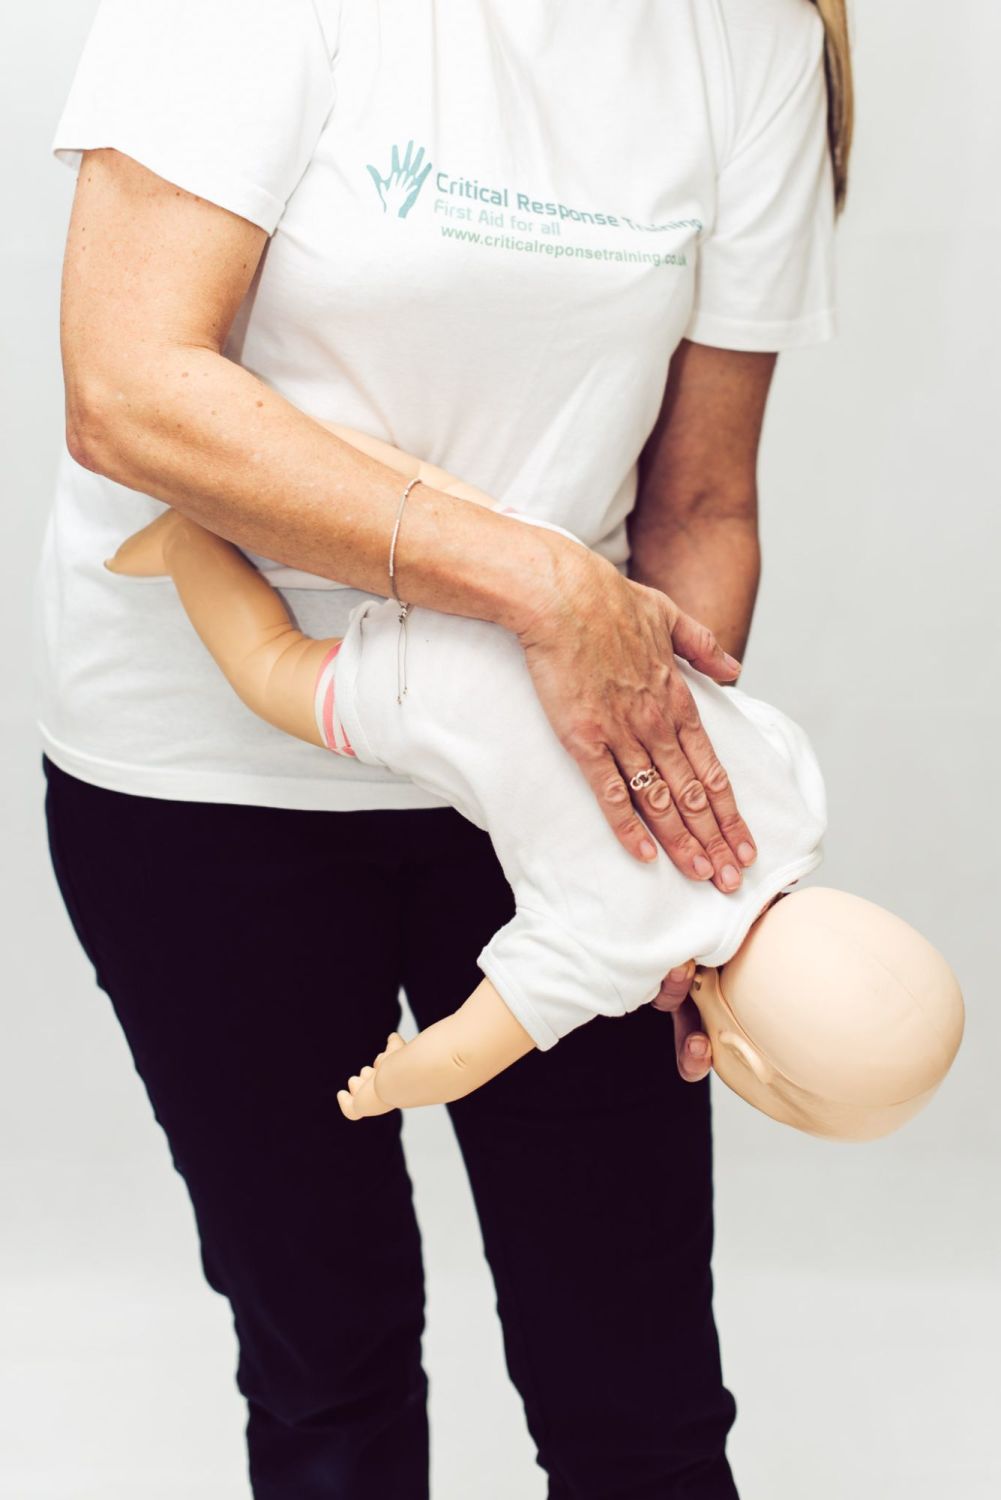 6-hour Paediatric First Aid course : Saturday 7th January 2023